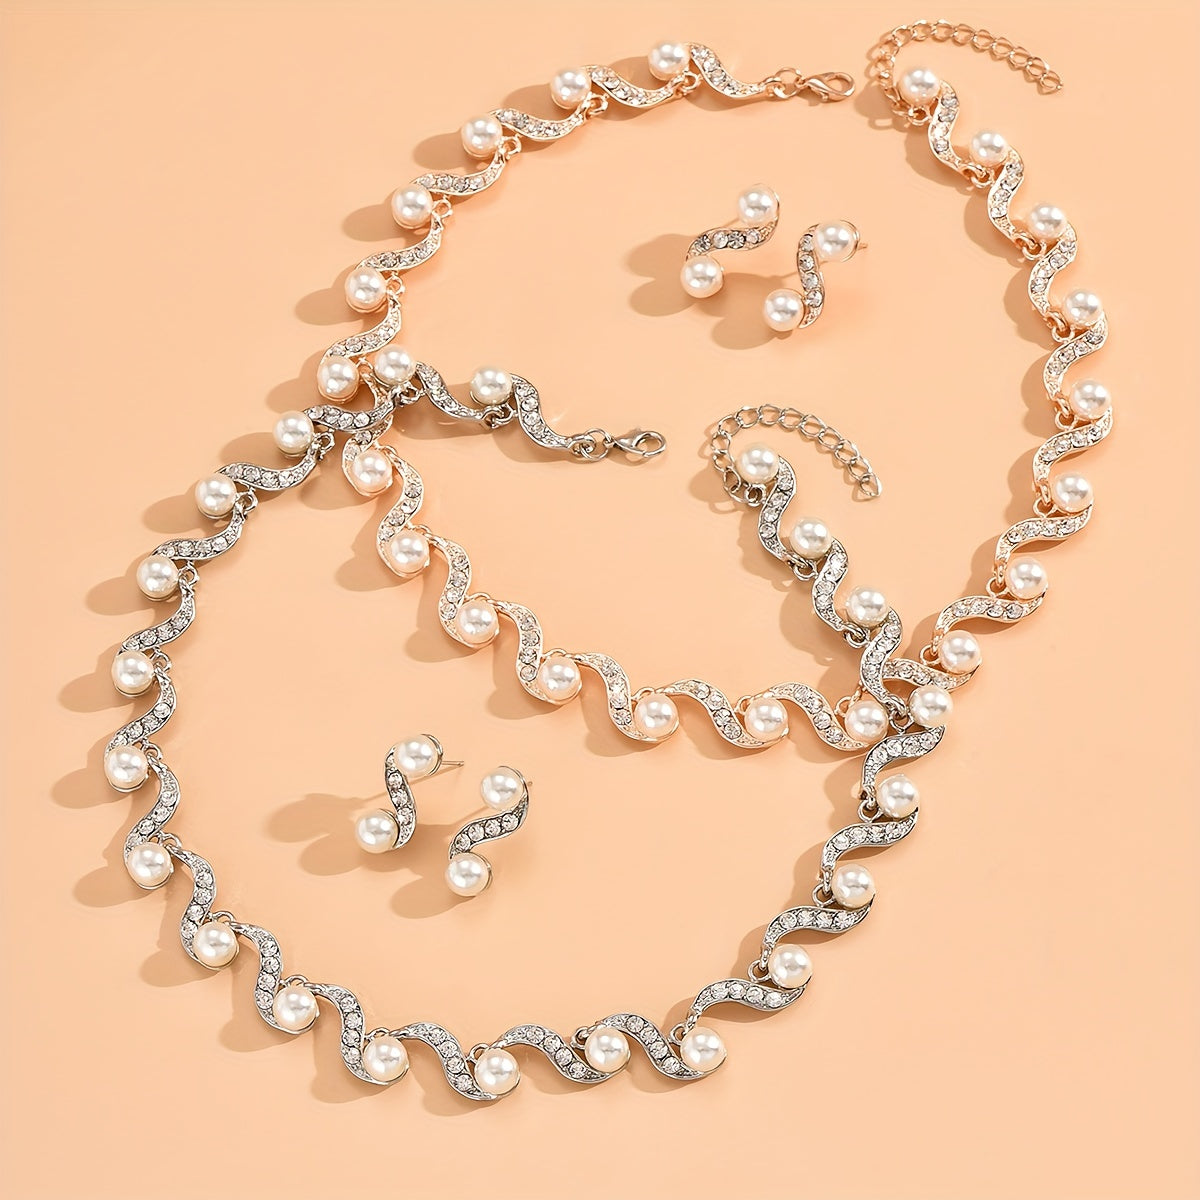 Elegant Faux Pearl Bridal Jewelry Set - Wave Choker Necklace and Drop Earrings for Prom and Parties